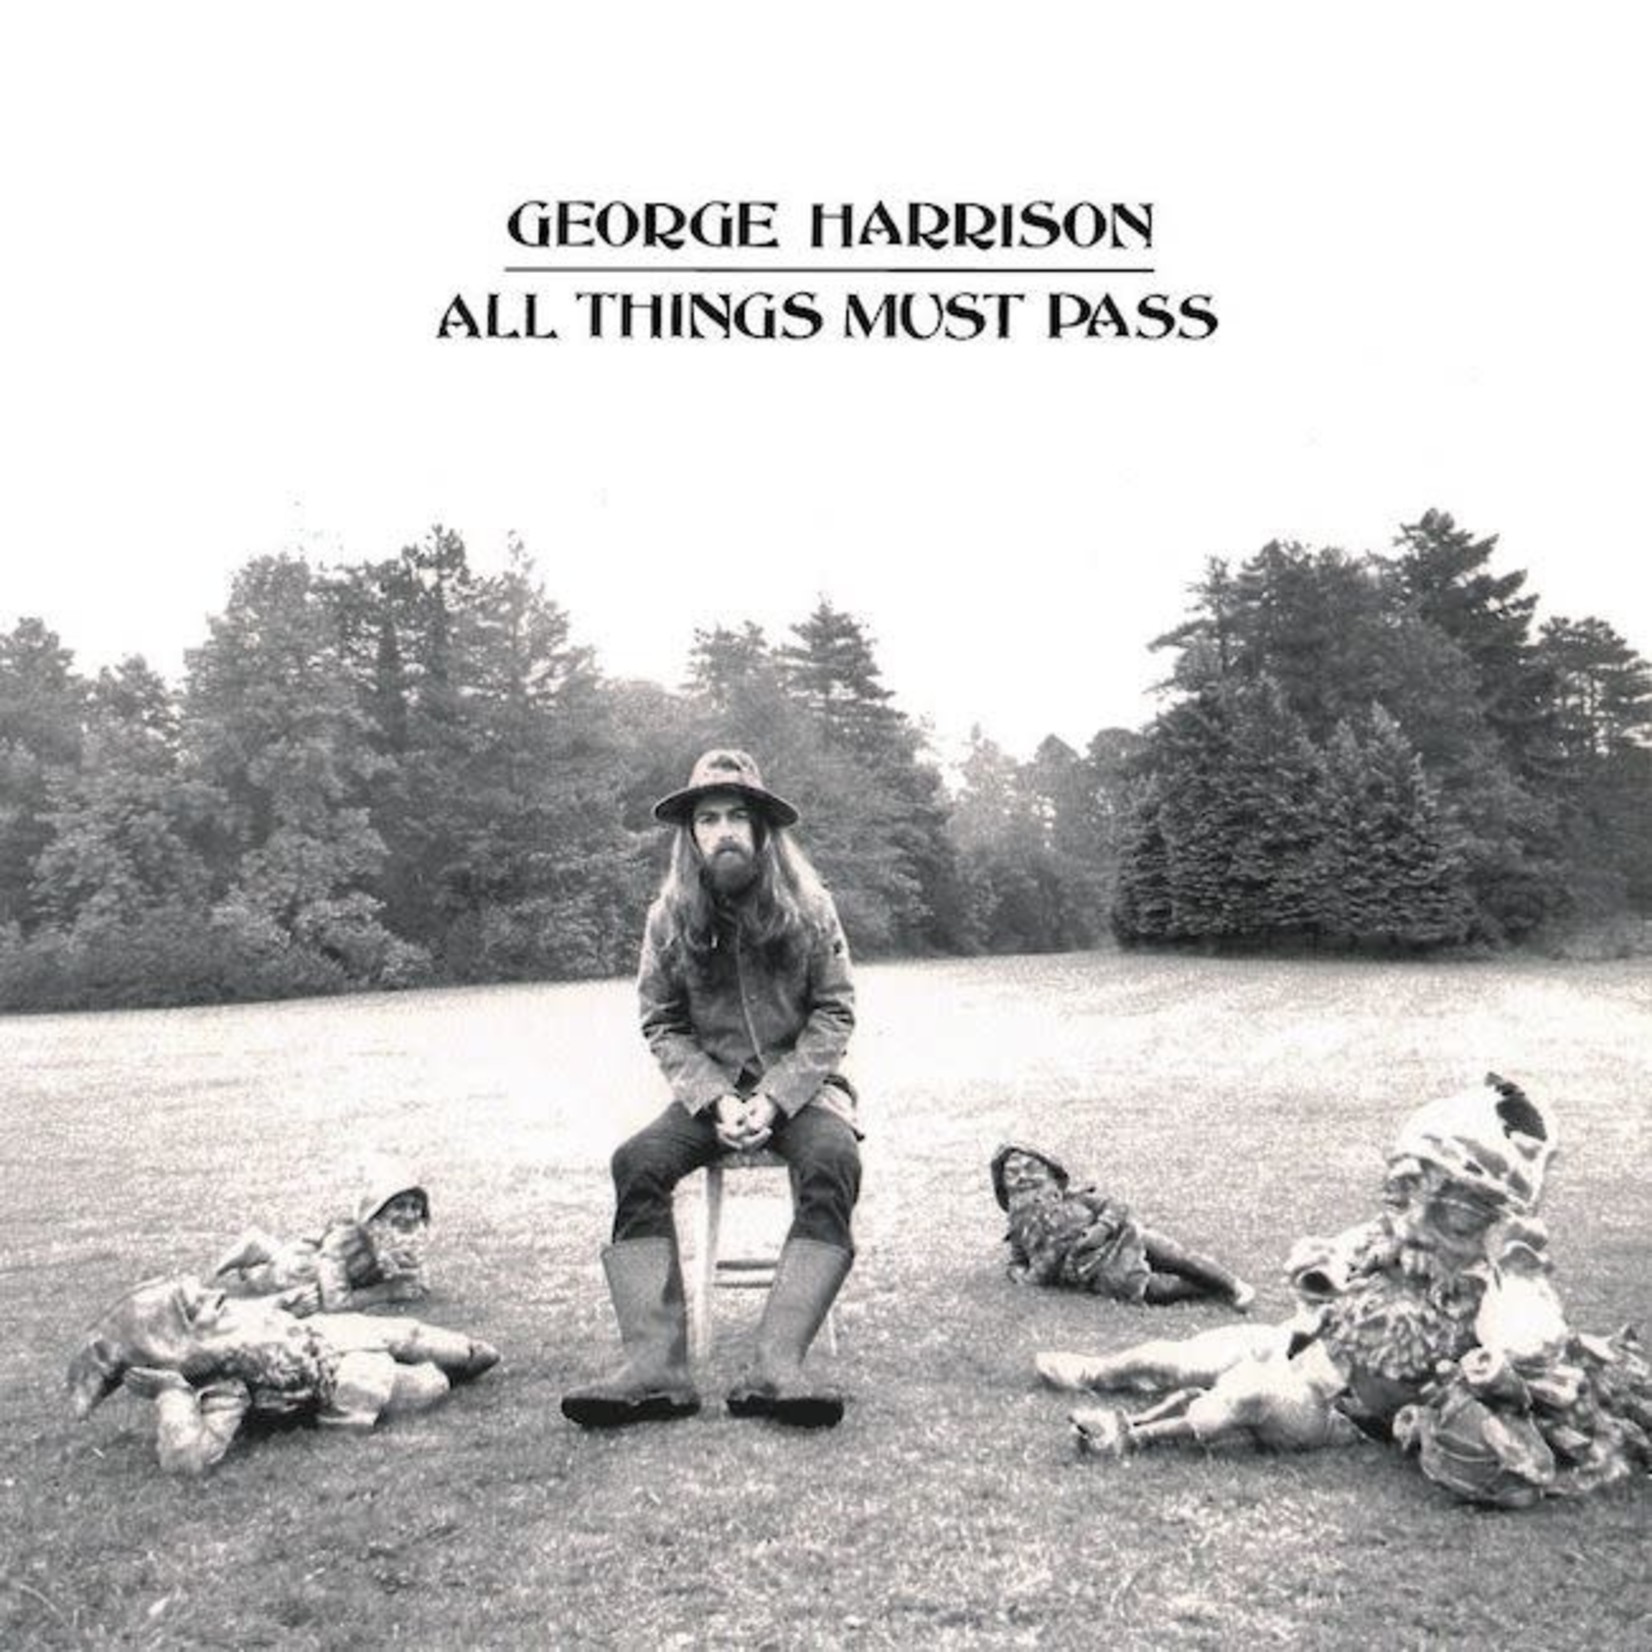 [Vintage] George Harrison - All Things Must Pass (without poster)